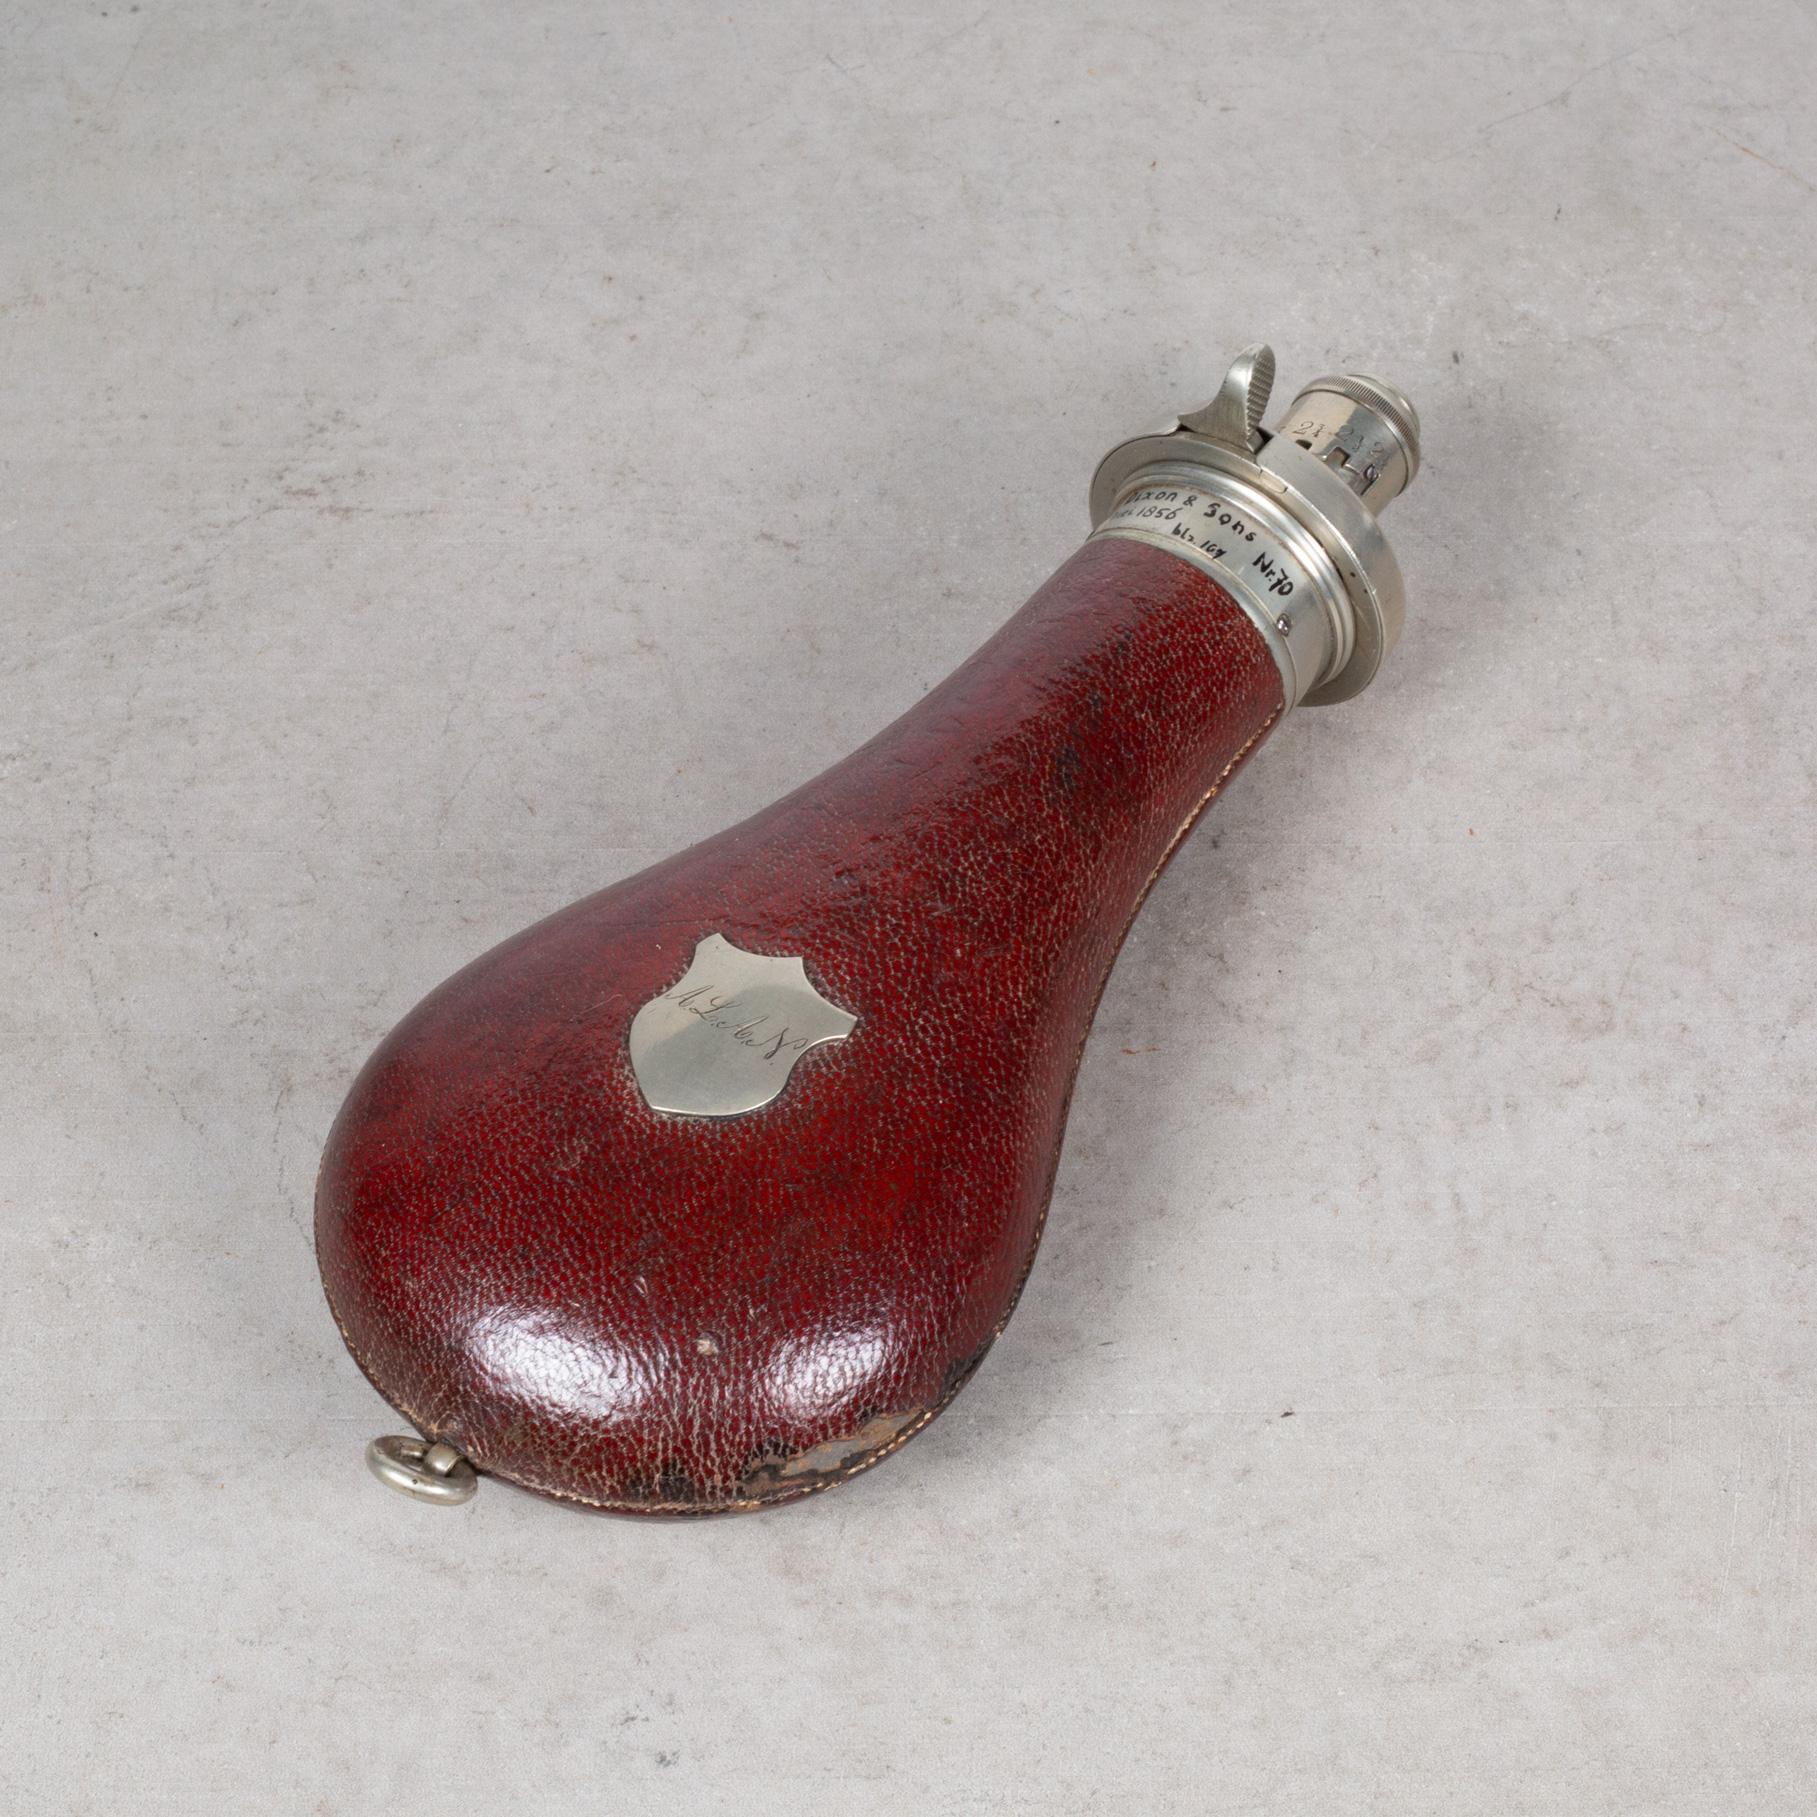 About

A Mid-19th Century English gun powder flask wrapped in leather with silver spout and monogrammed silver plaque 